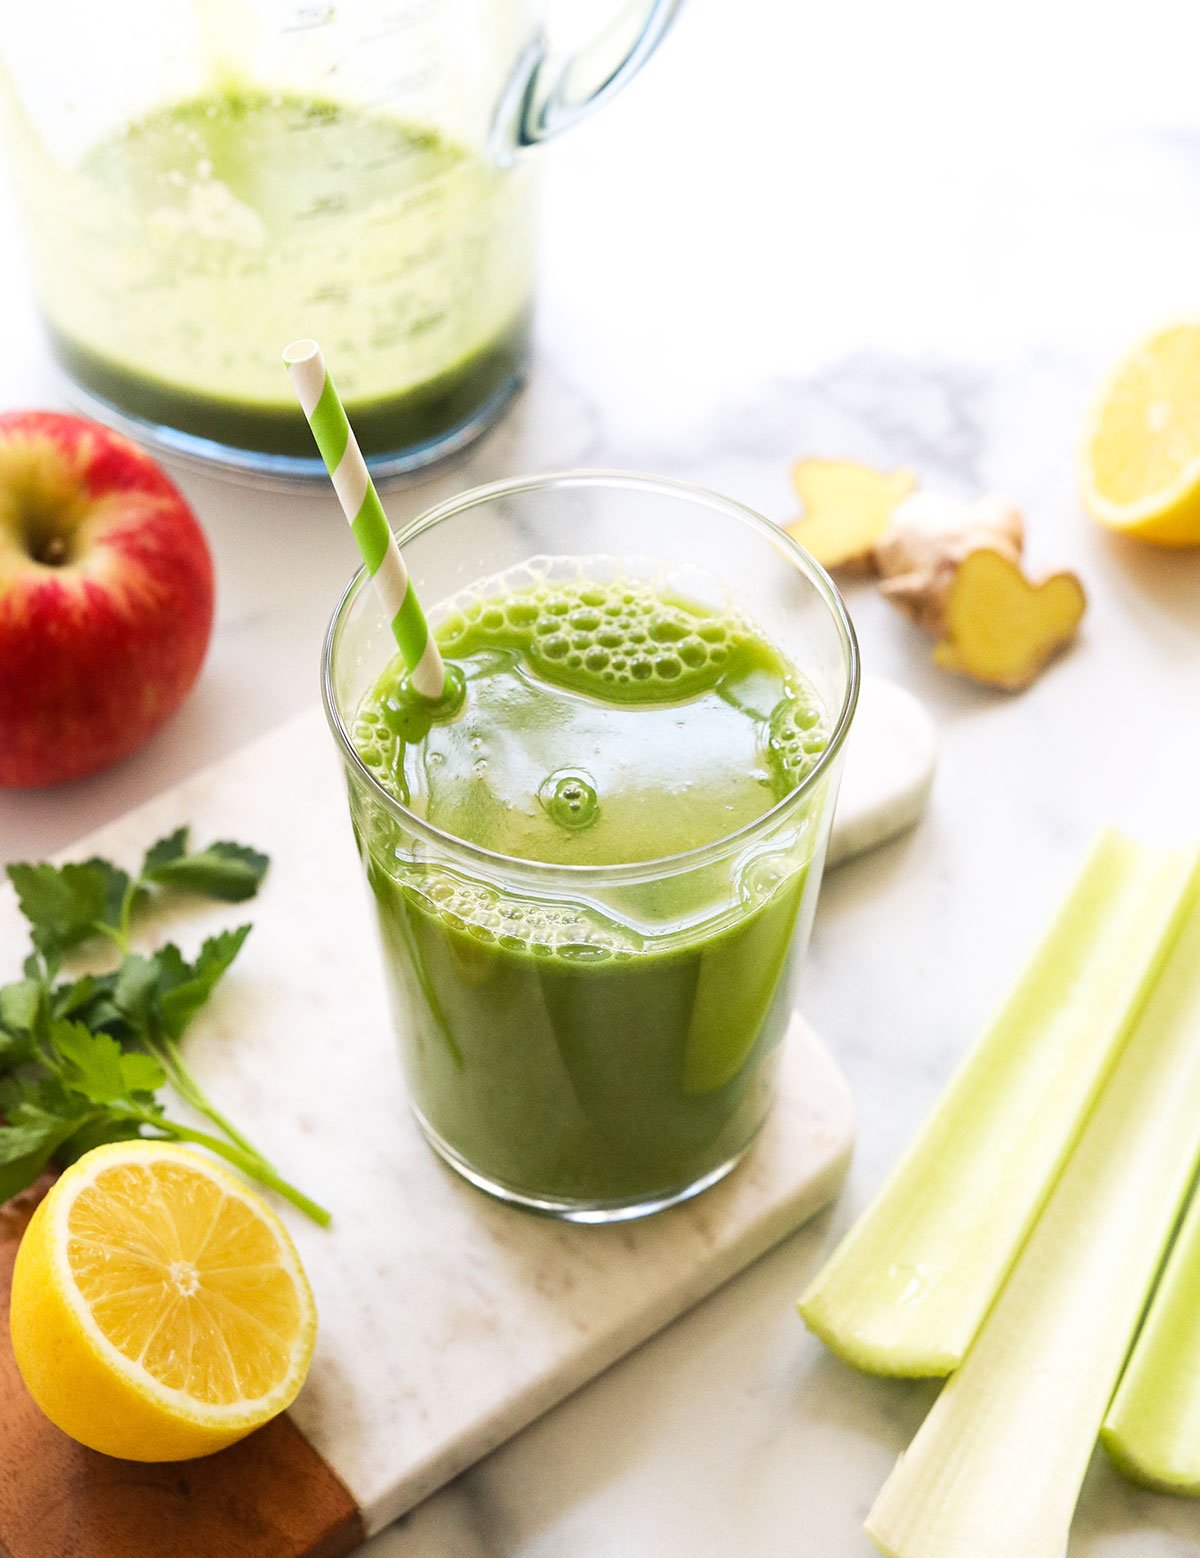 Juicing Recipes for Cleanse 